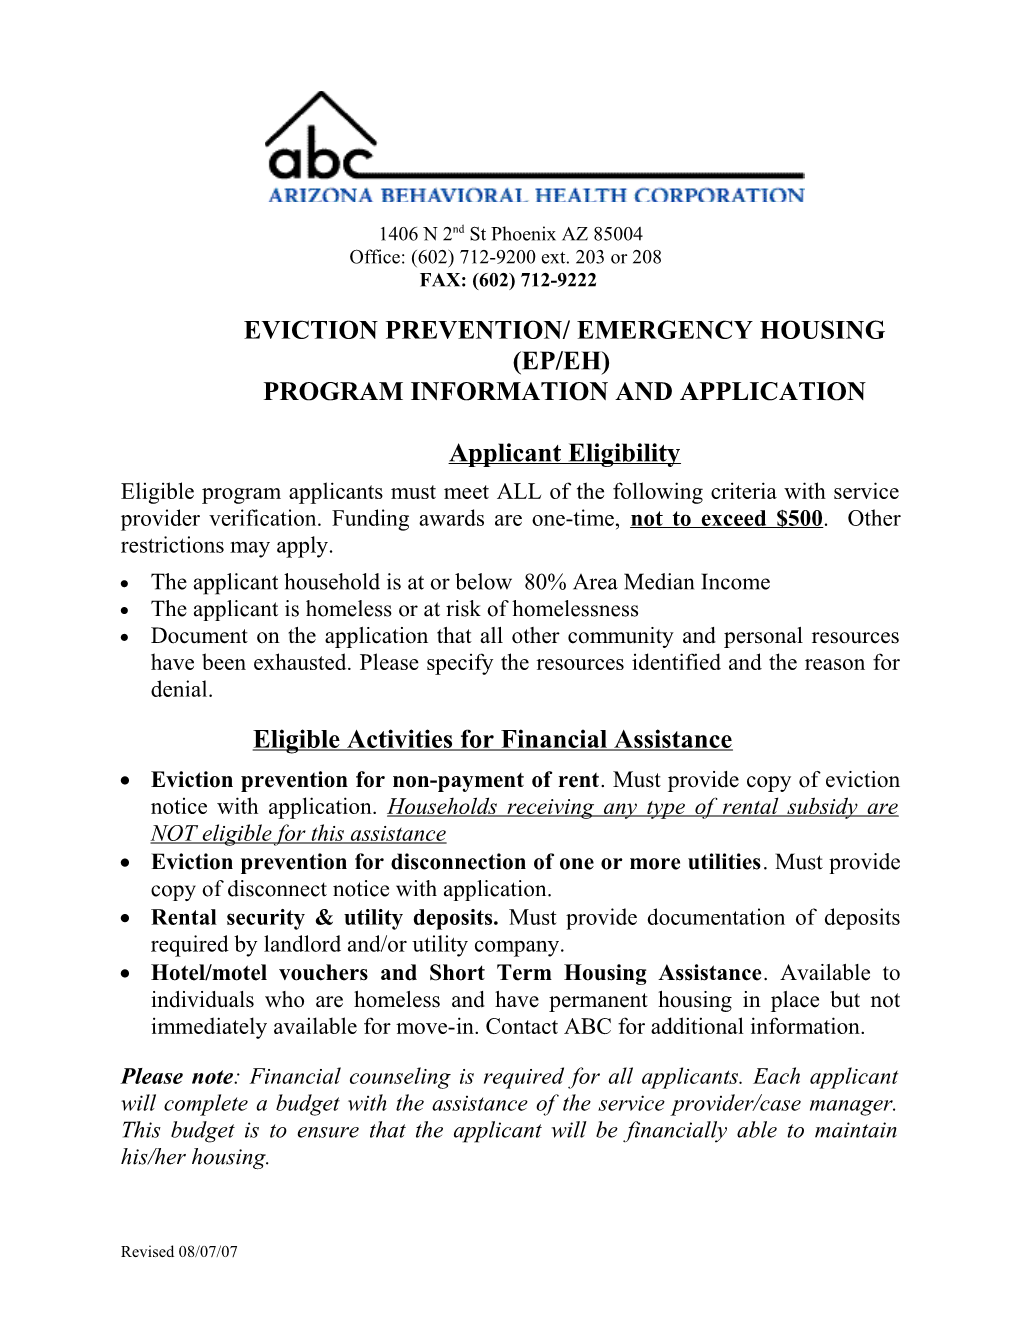 Eviction Prevention/ Emergency Housing (Ep/Eh)